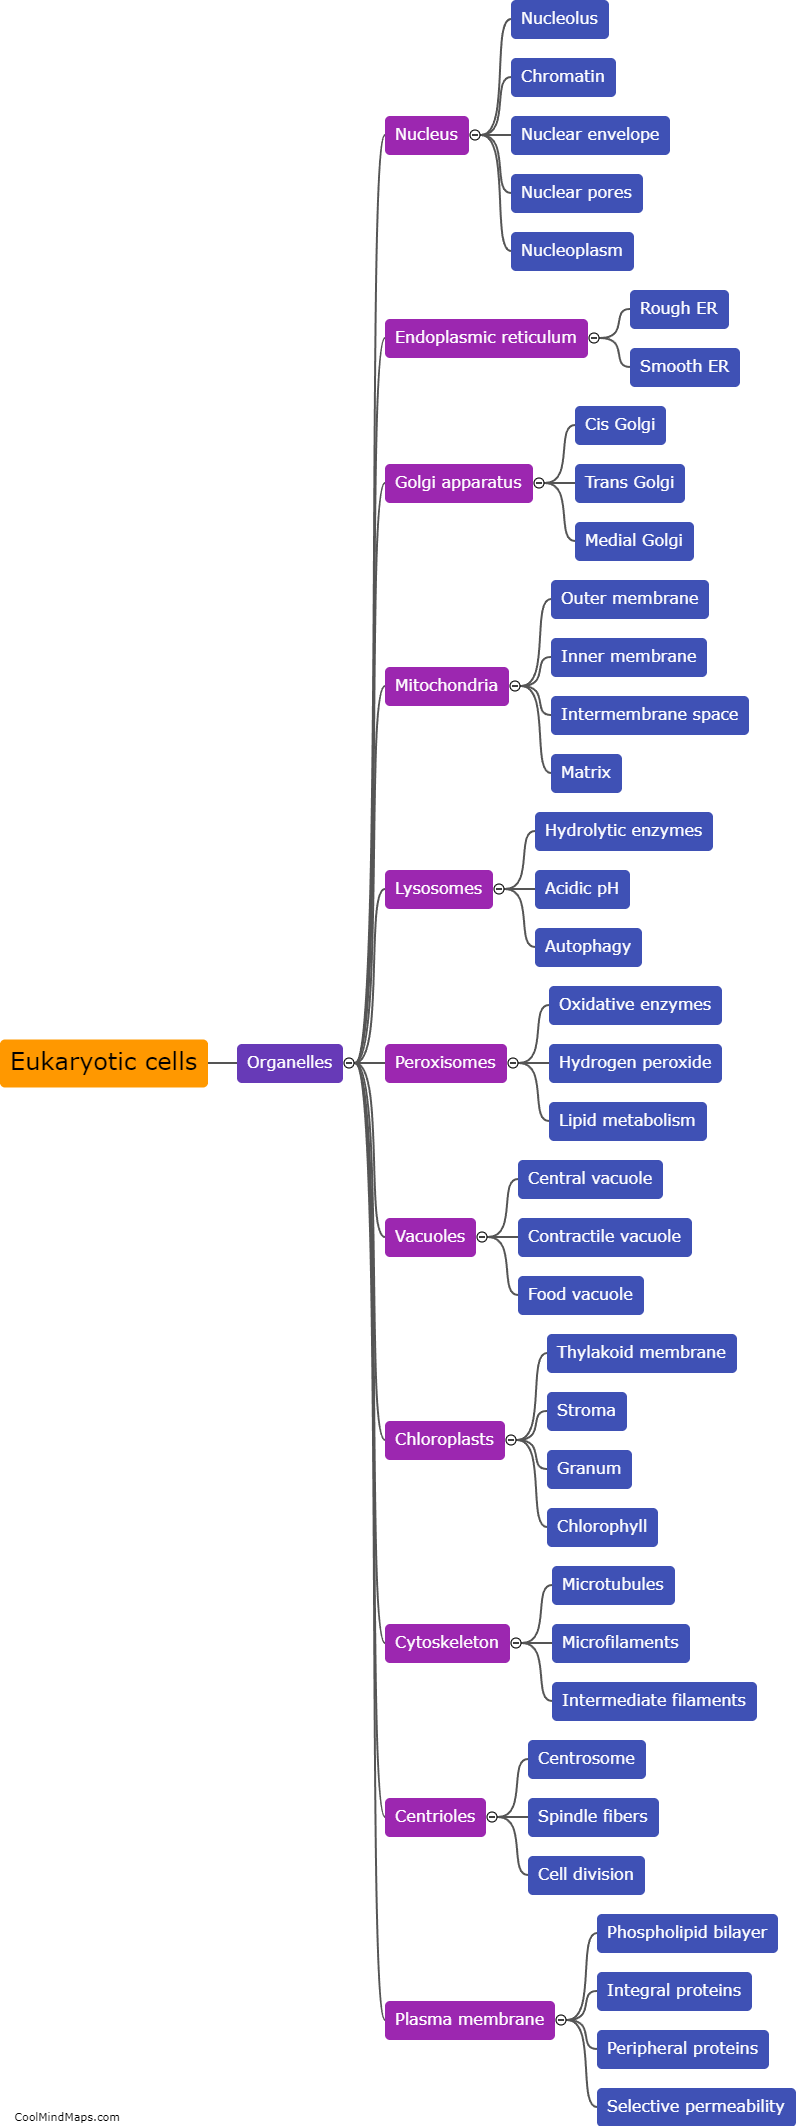 What are the major organelles found in eukaryotic cells?